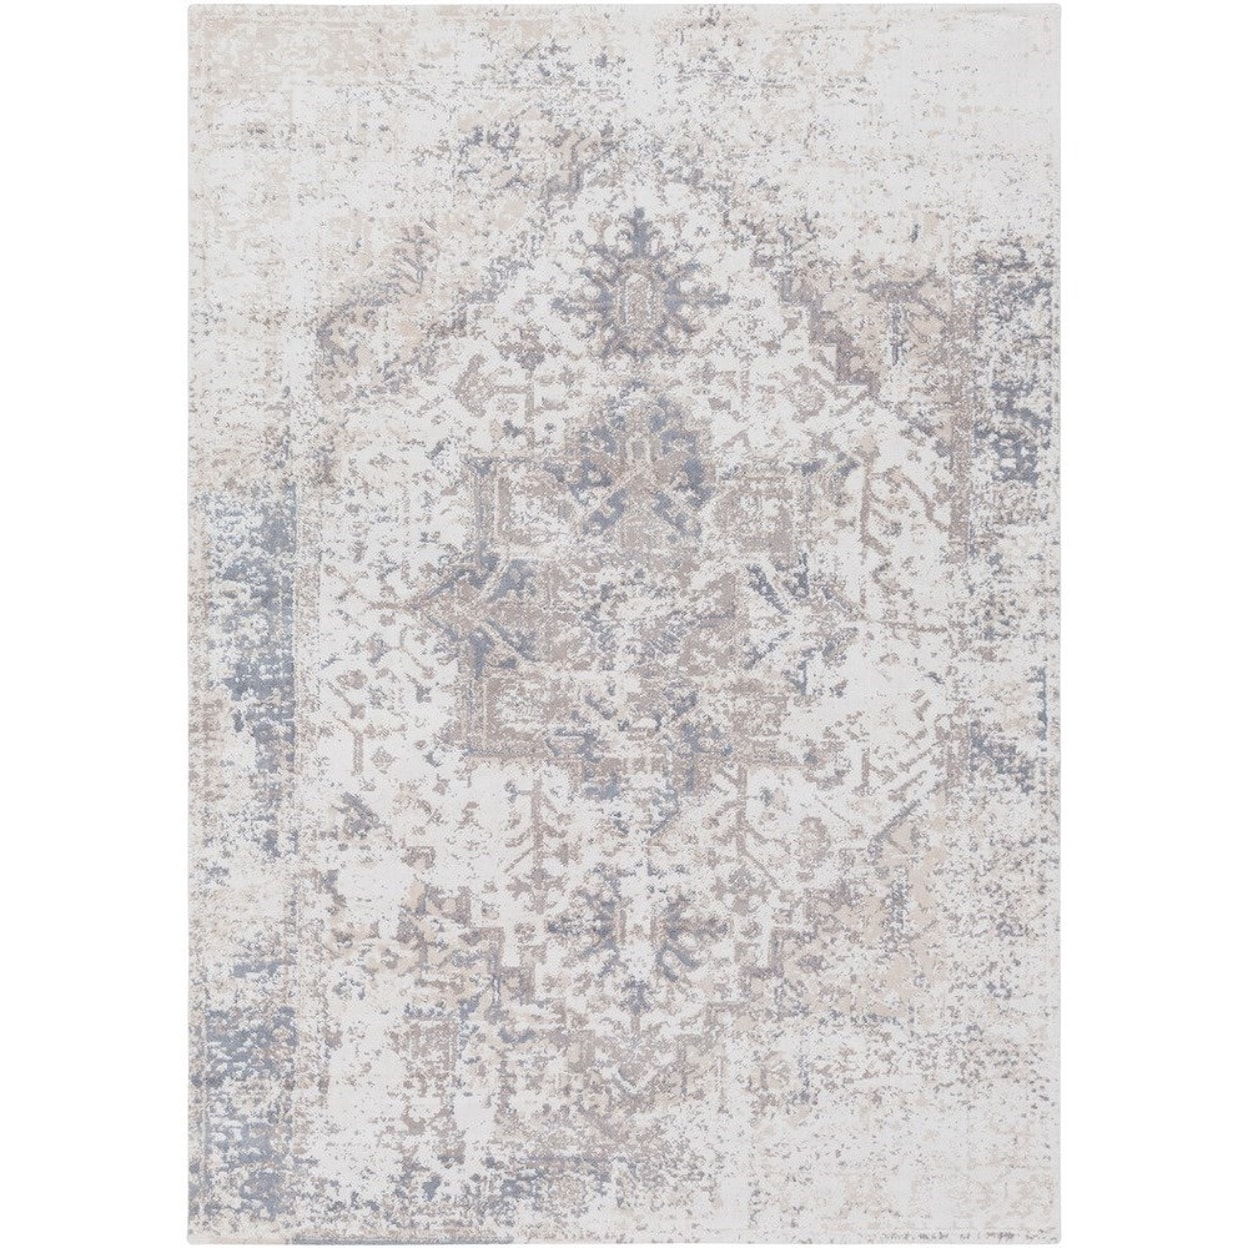 Ruby-Gordon Accents Apricity 2' x 3' Rug